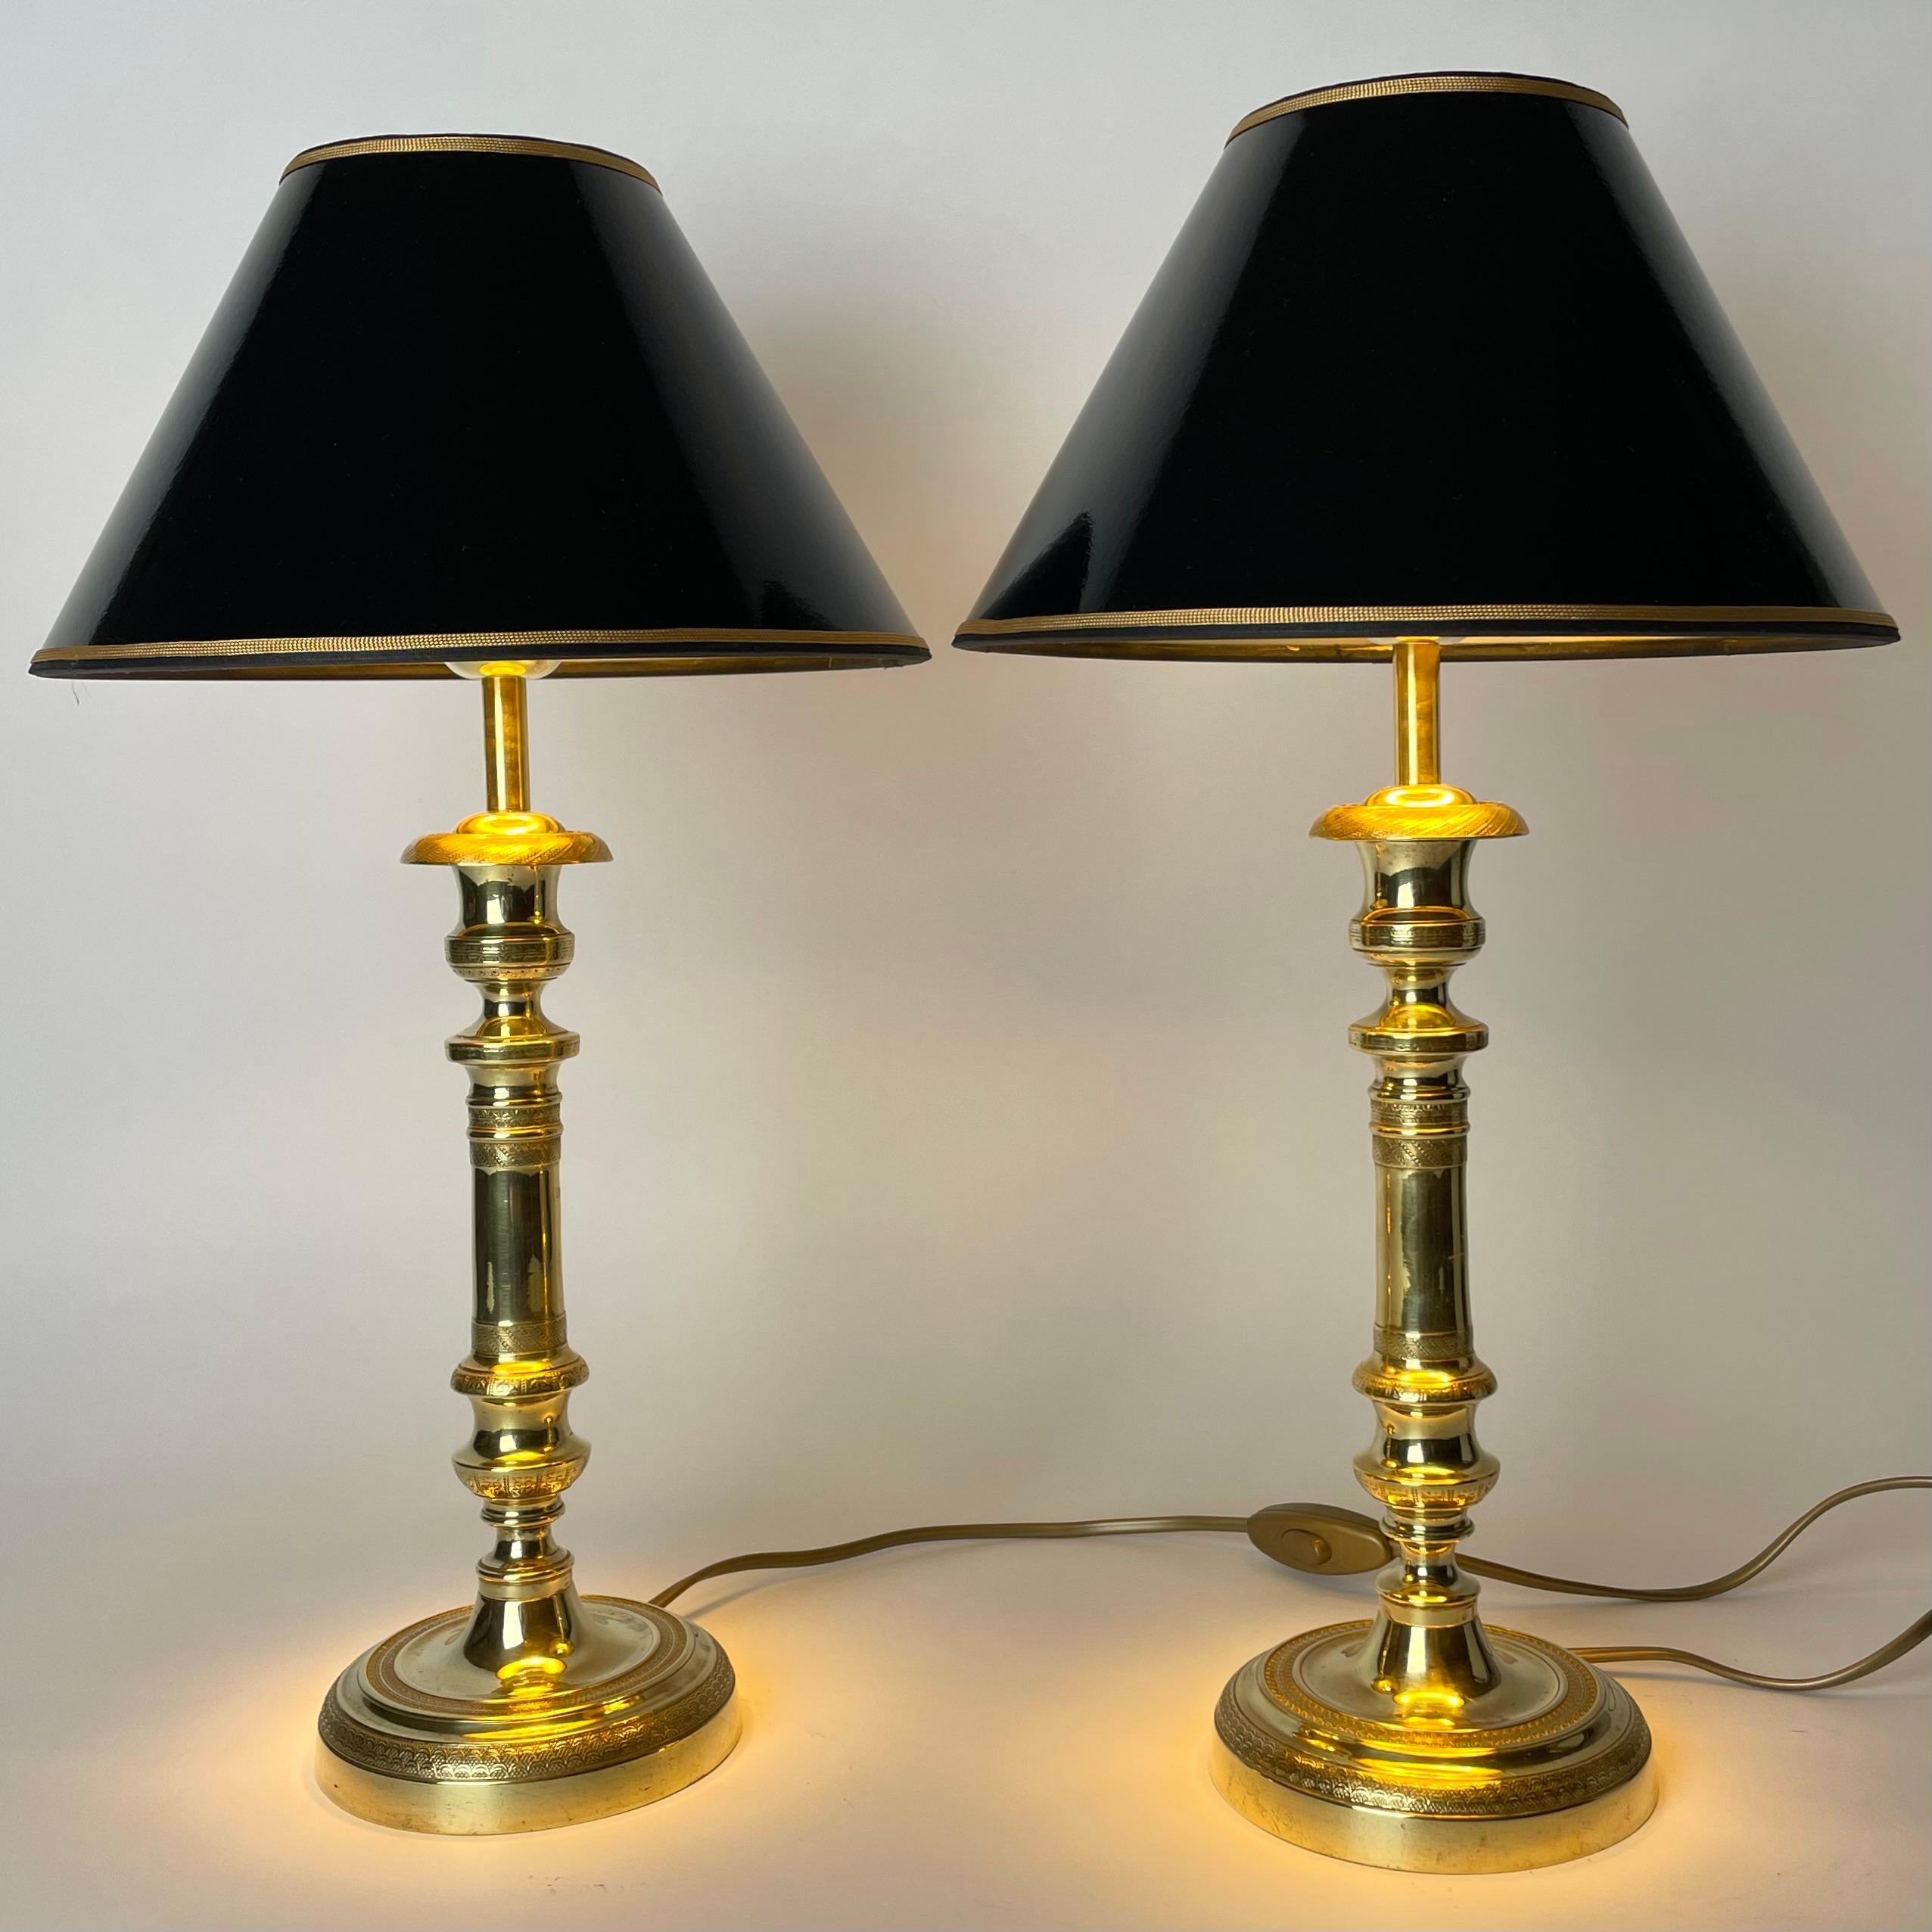 Elegant pair of Empire Table Lamps in Bronze. Originally a pair of Empire candlesticks from the 1820s, converted to table lamps in the early 20th Century.

Newly rewired electricity 

New lampshades in black lacquer with gilding on the inside,